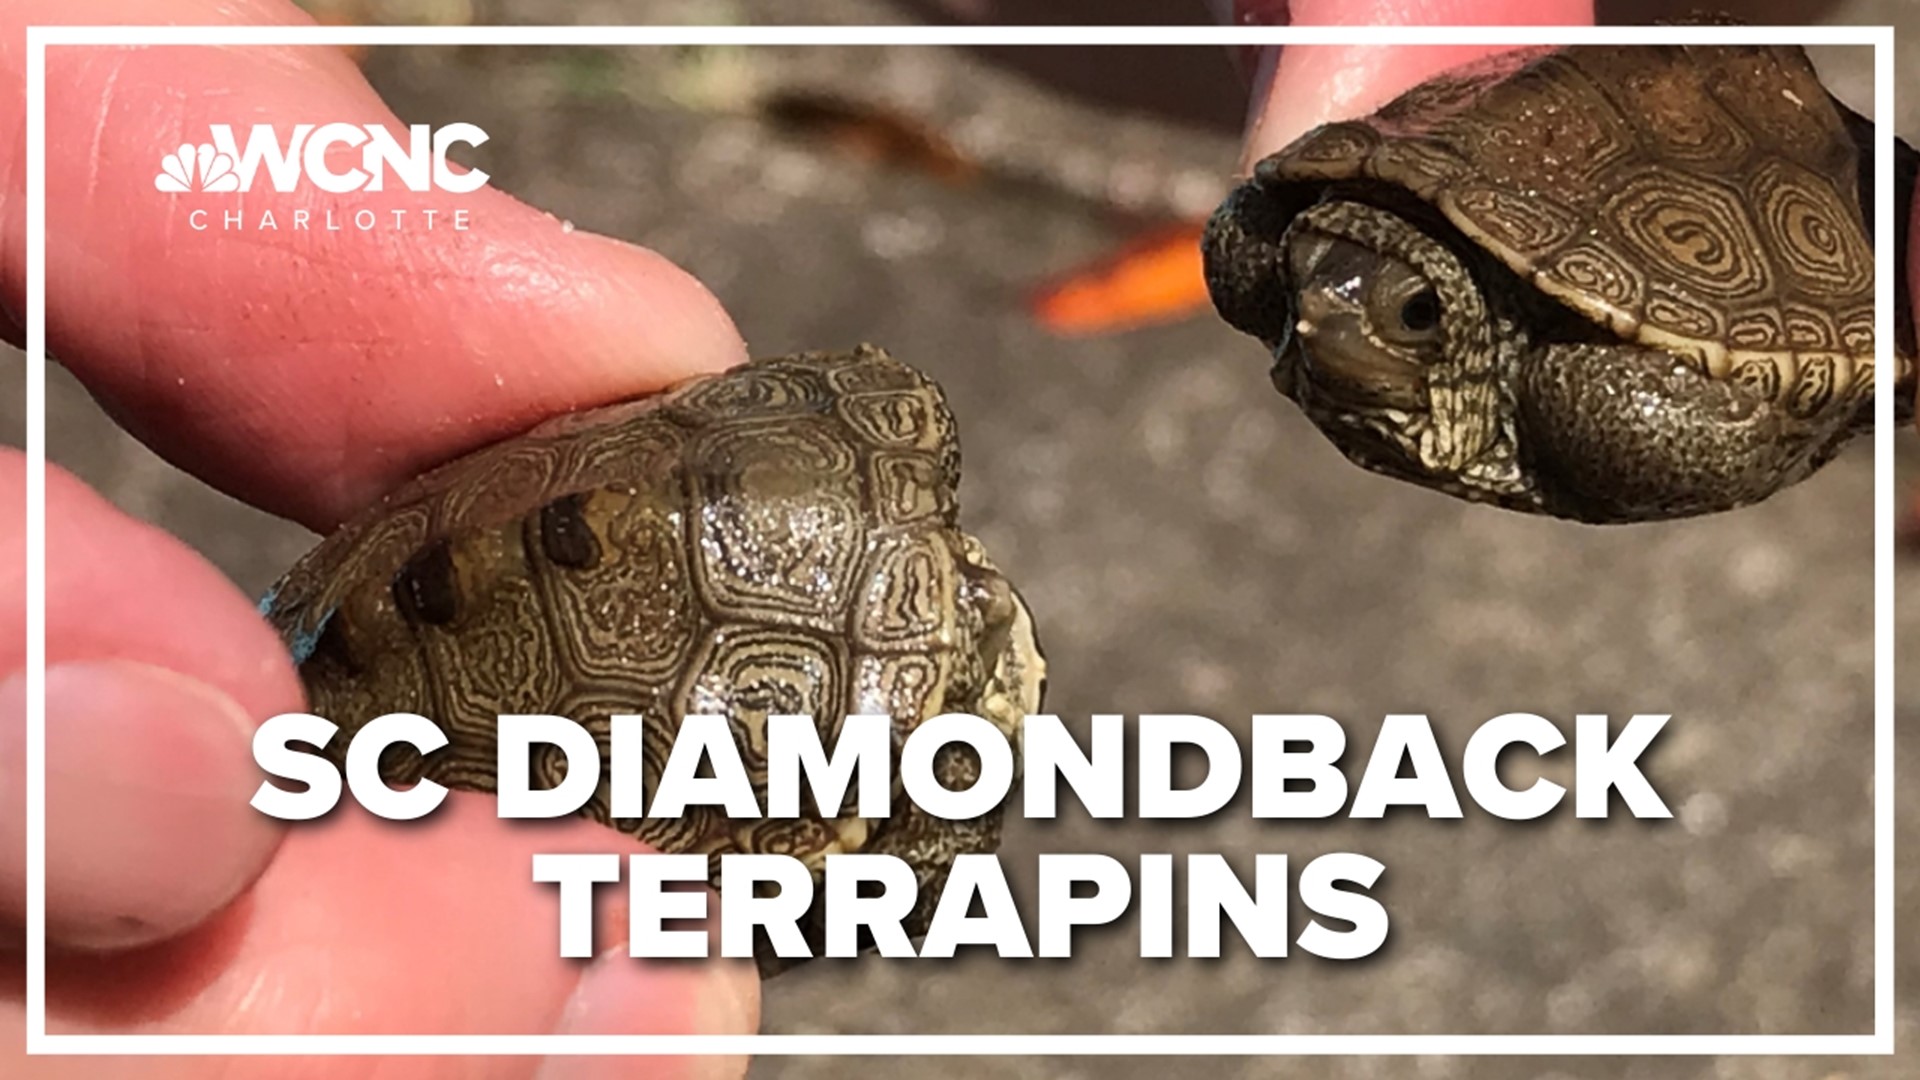 As adorable diamondback terrapins emerge in SC coastal marshes, the SCDNR wants to know if you spot one